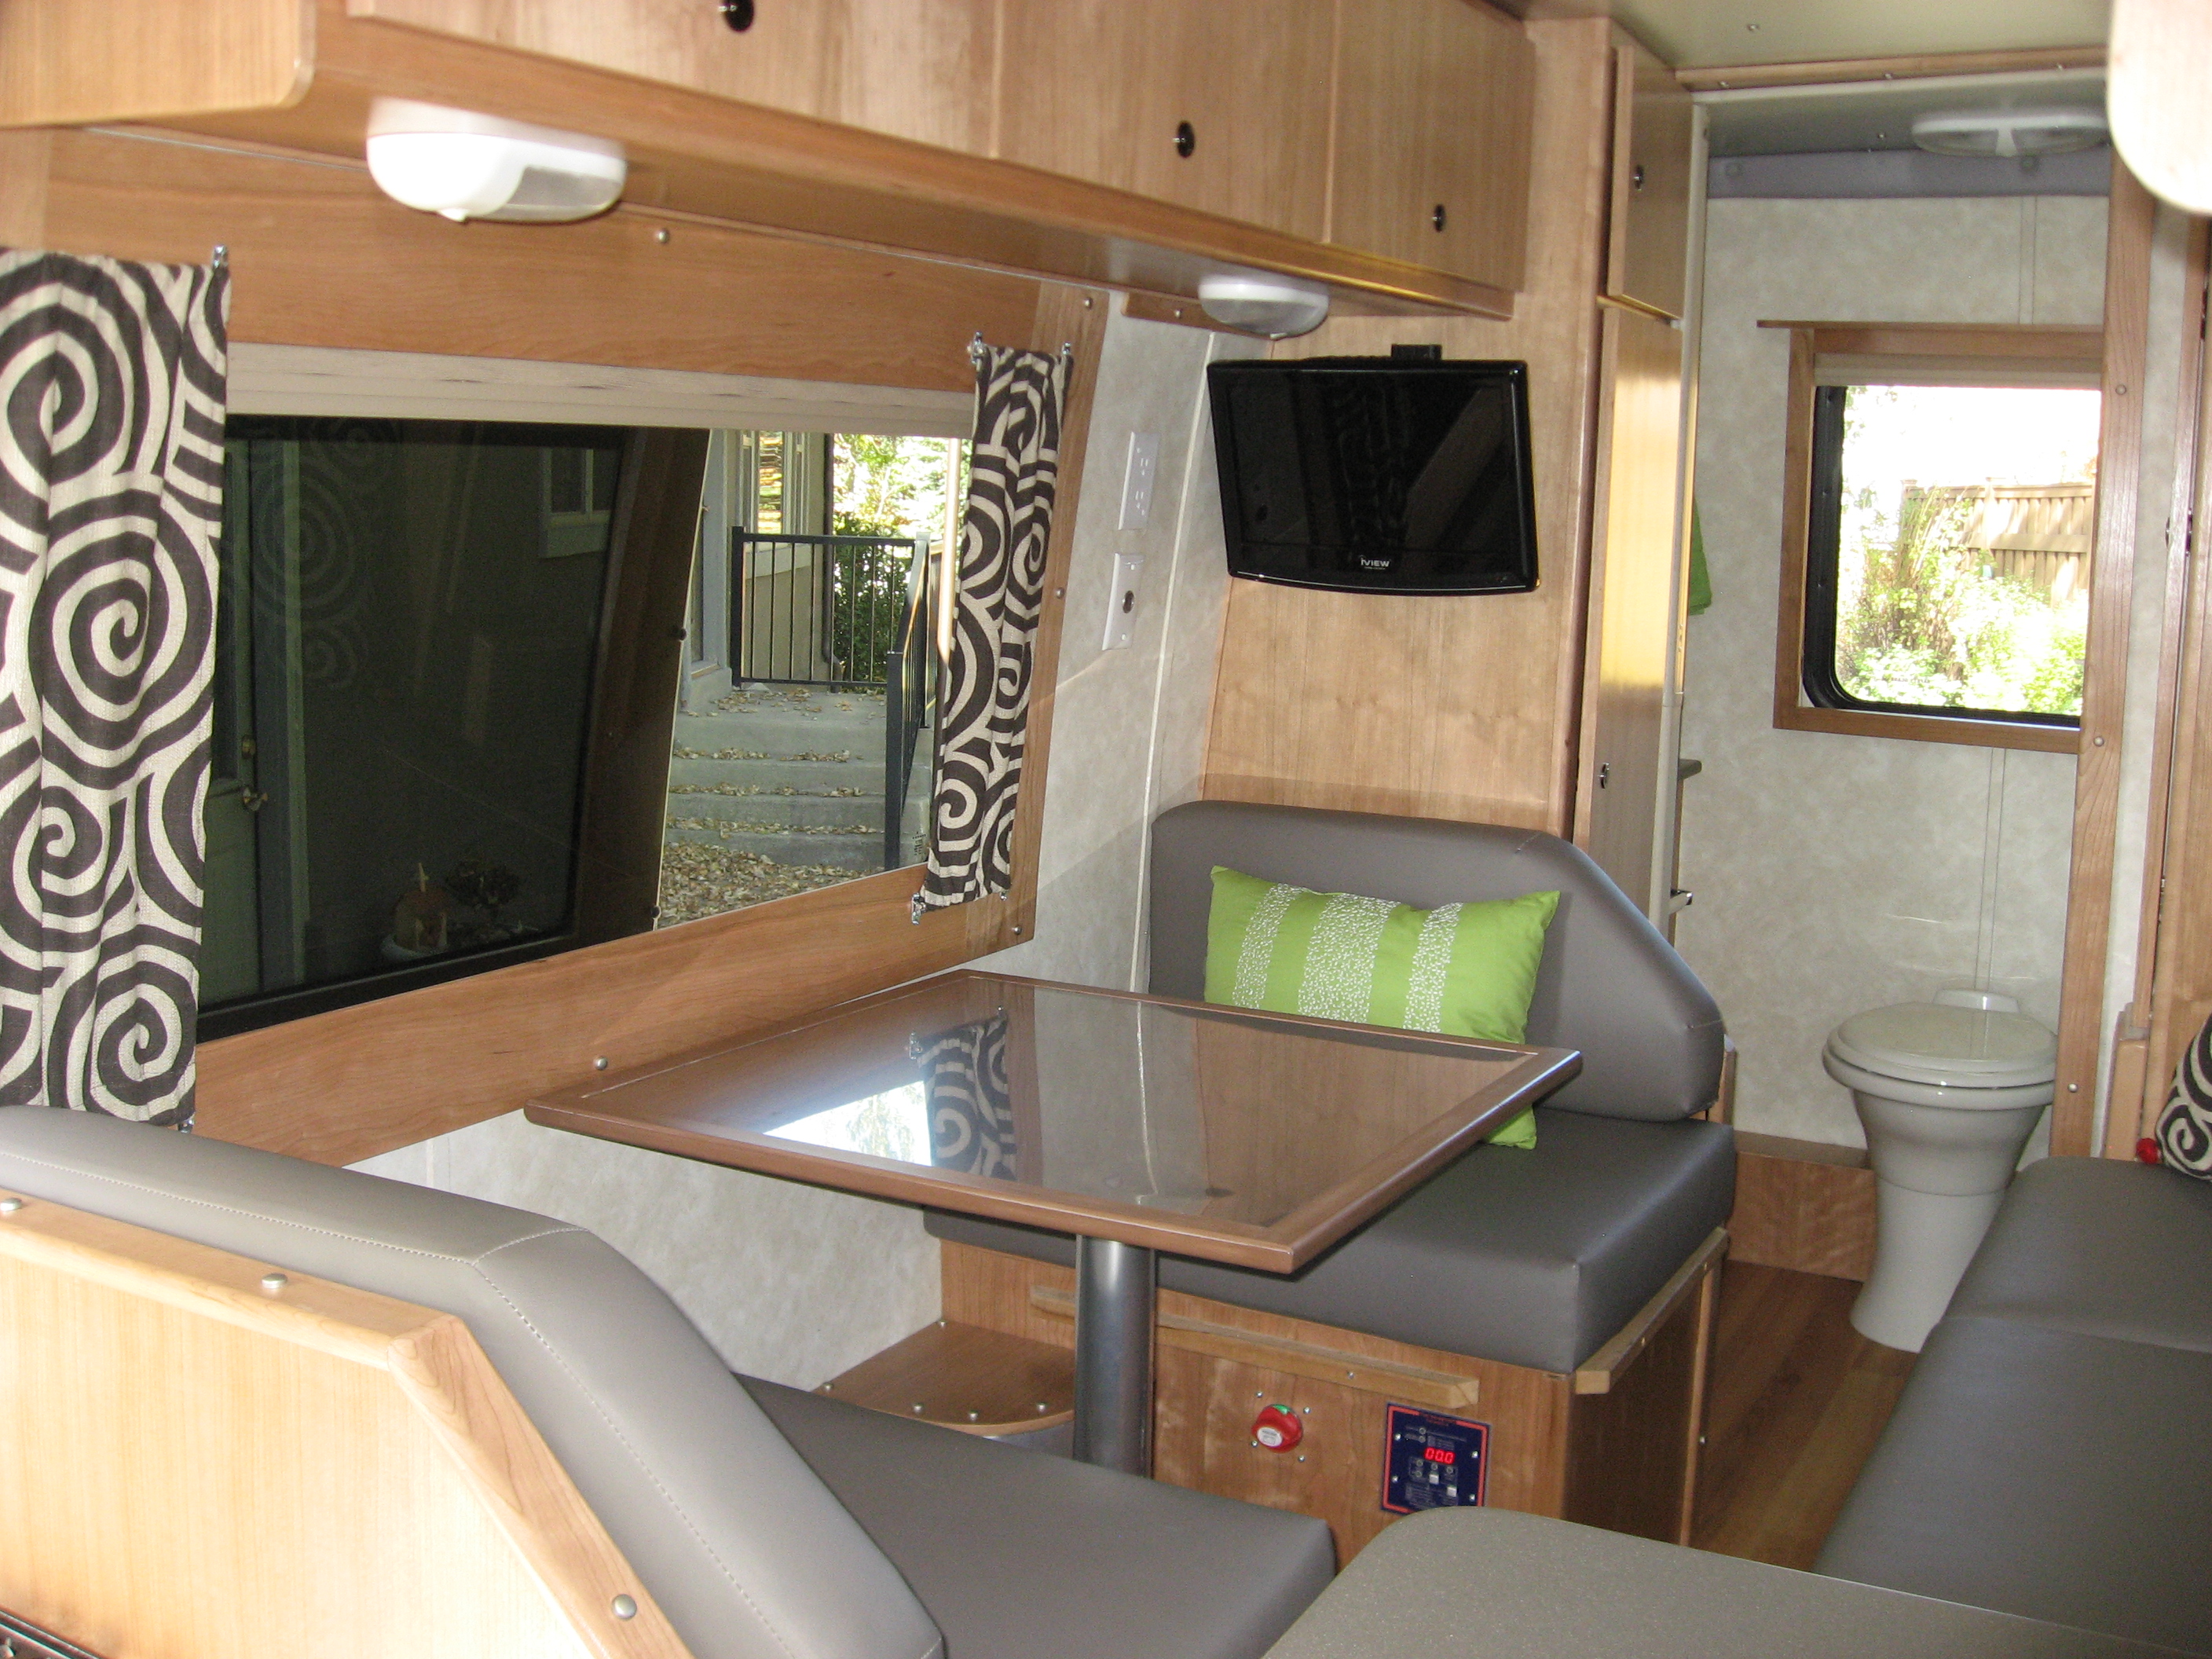 The Rv Remodel